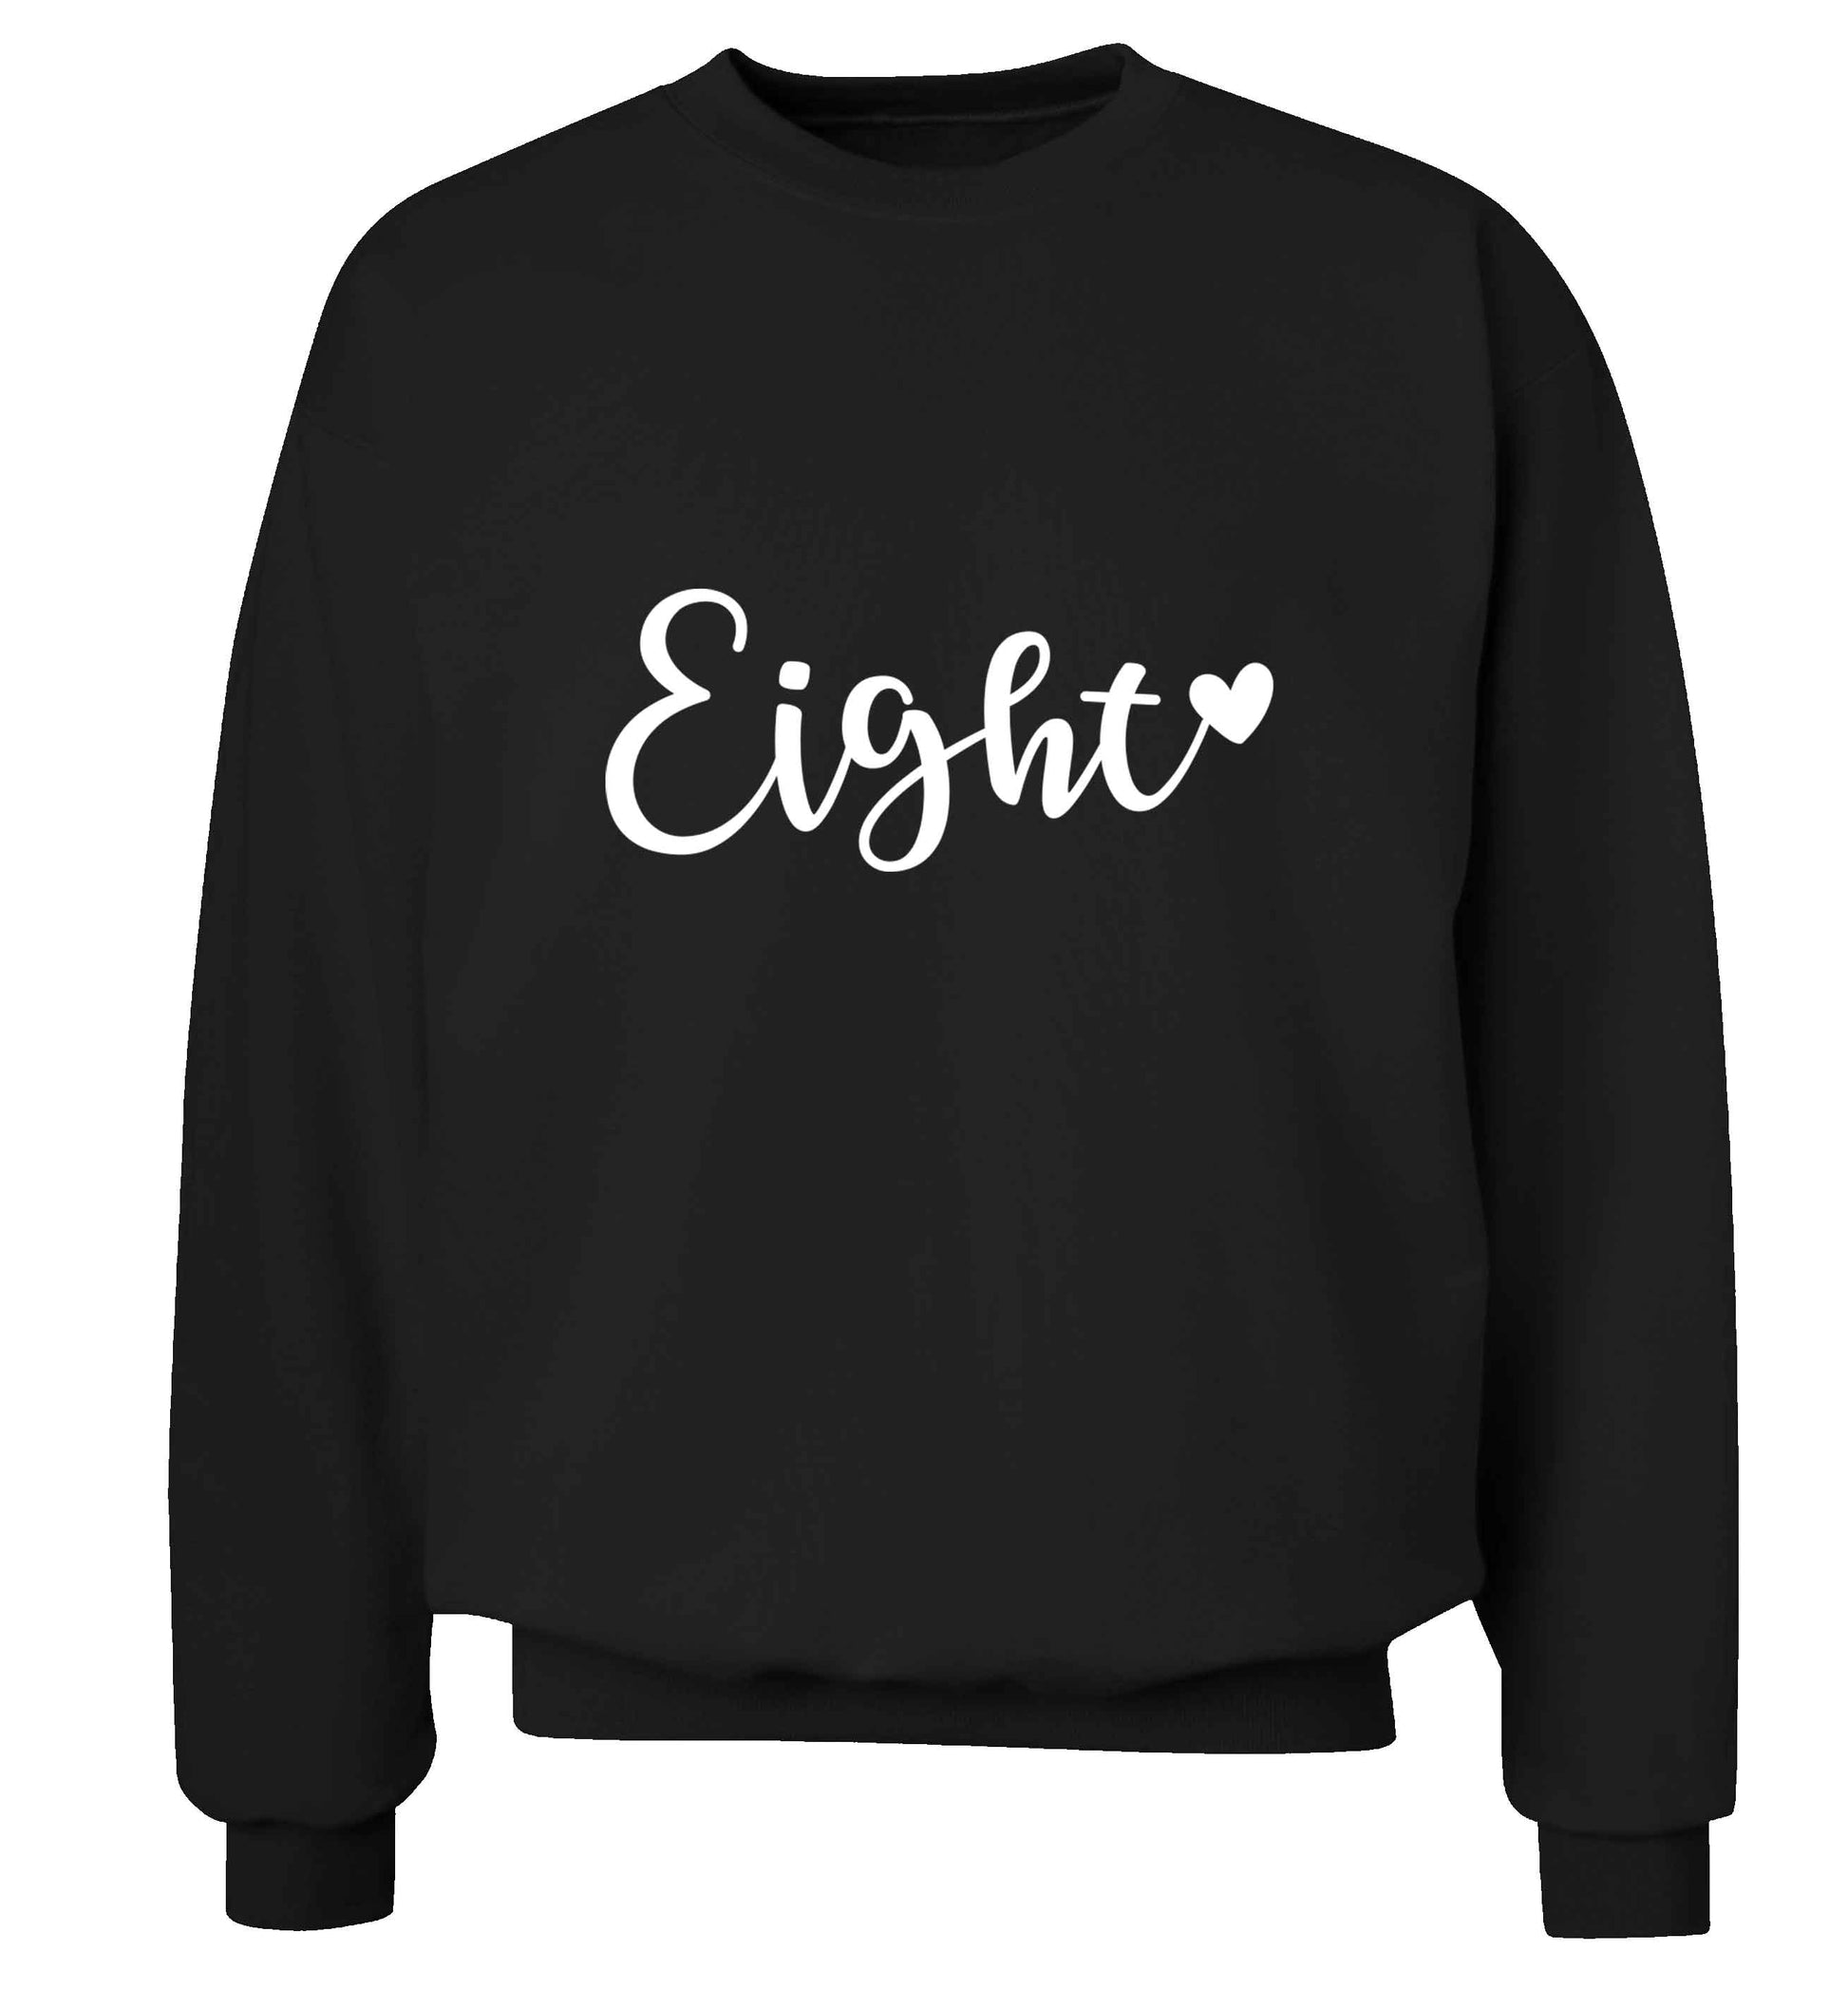 Eight and heart adult's unisex black sweater 2XL